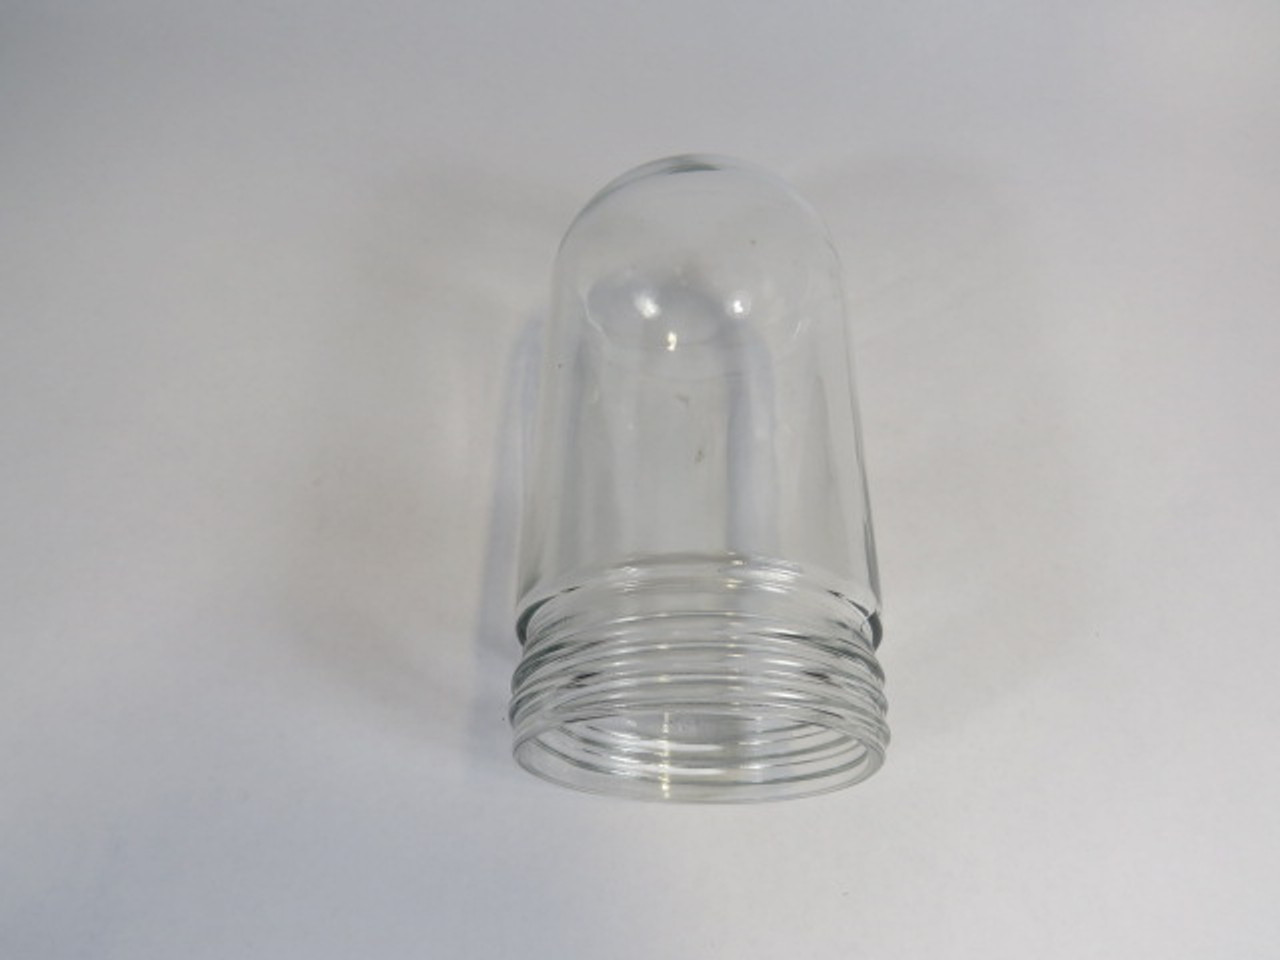 PG. Co. 25 Rounded Bottom Clear Glass Light Lamp Fixture USED